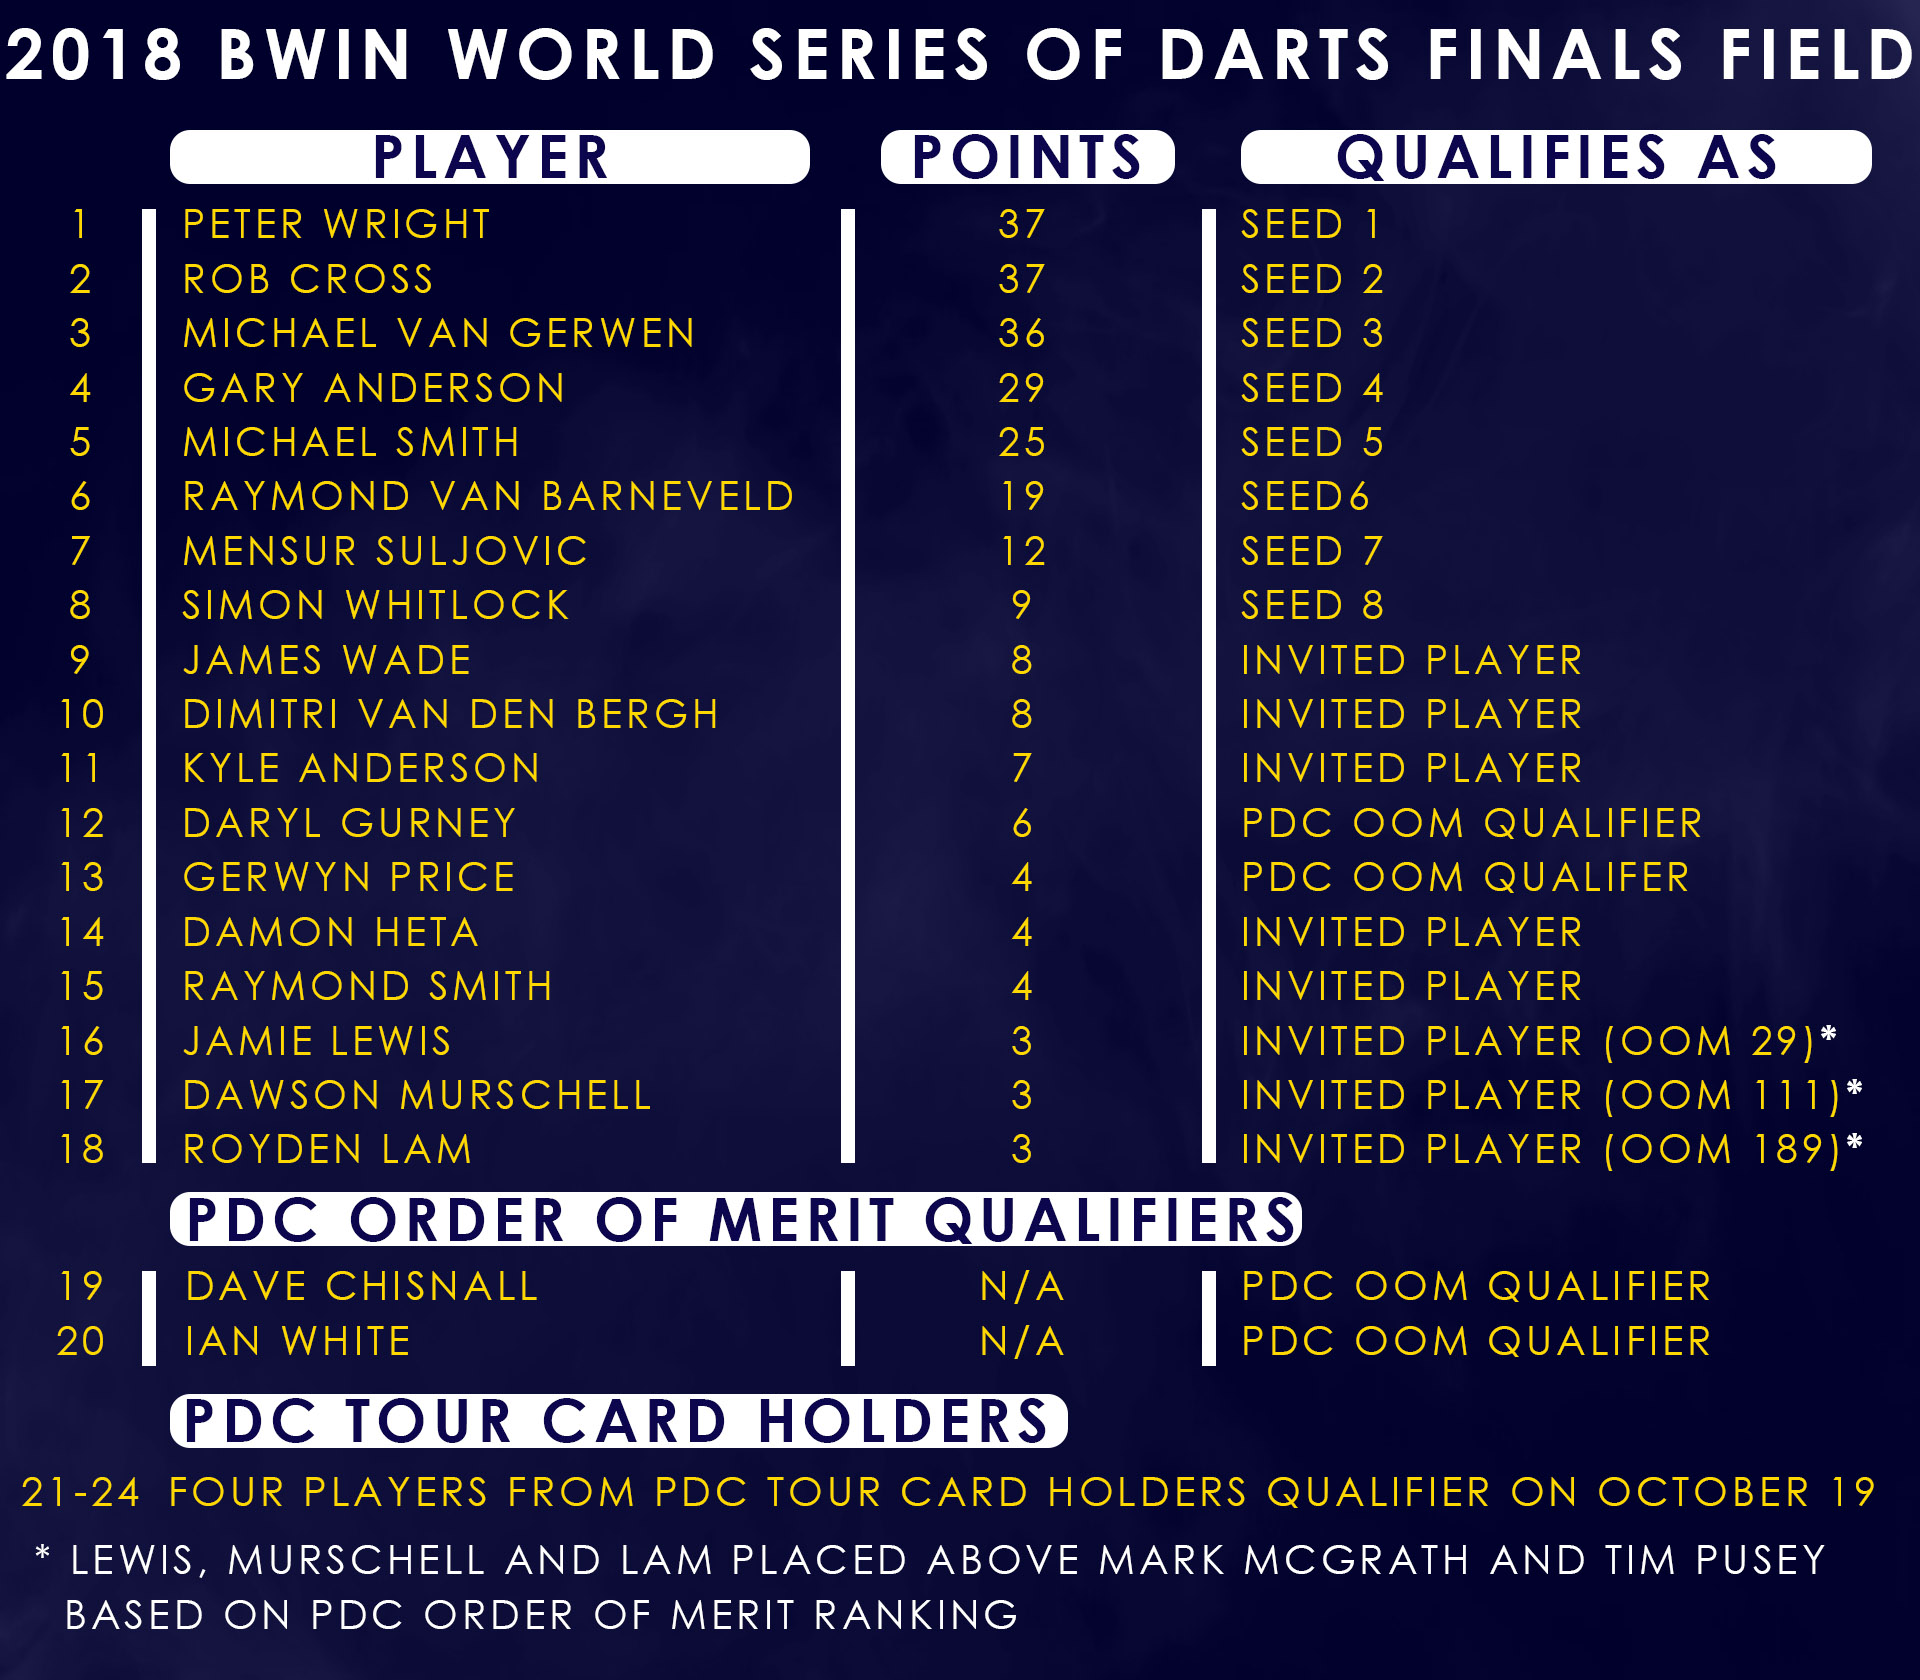 World Series Finals Qualifying Graphic (PDC)